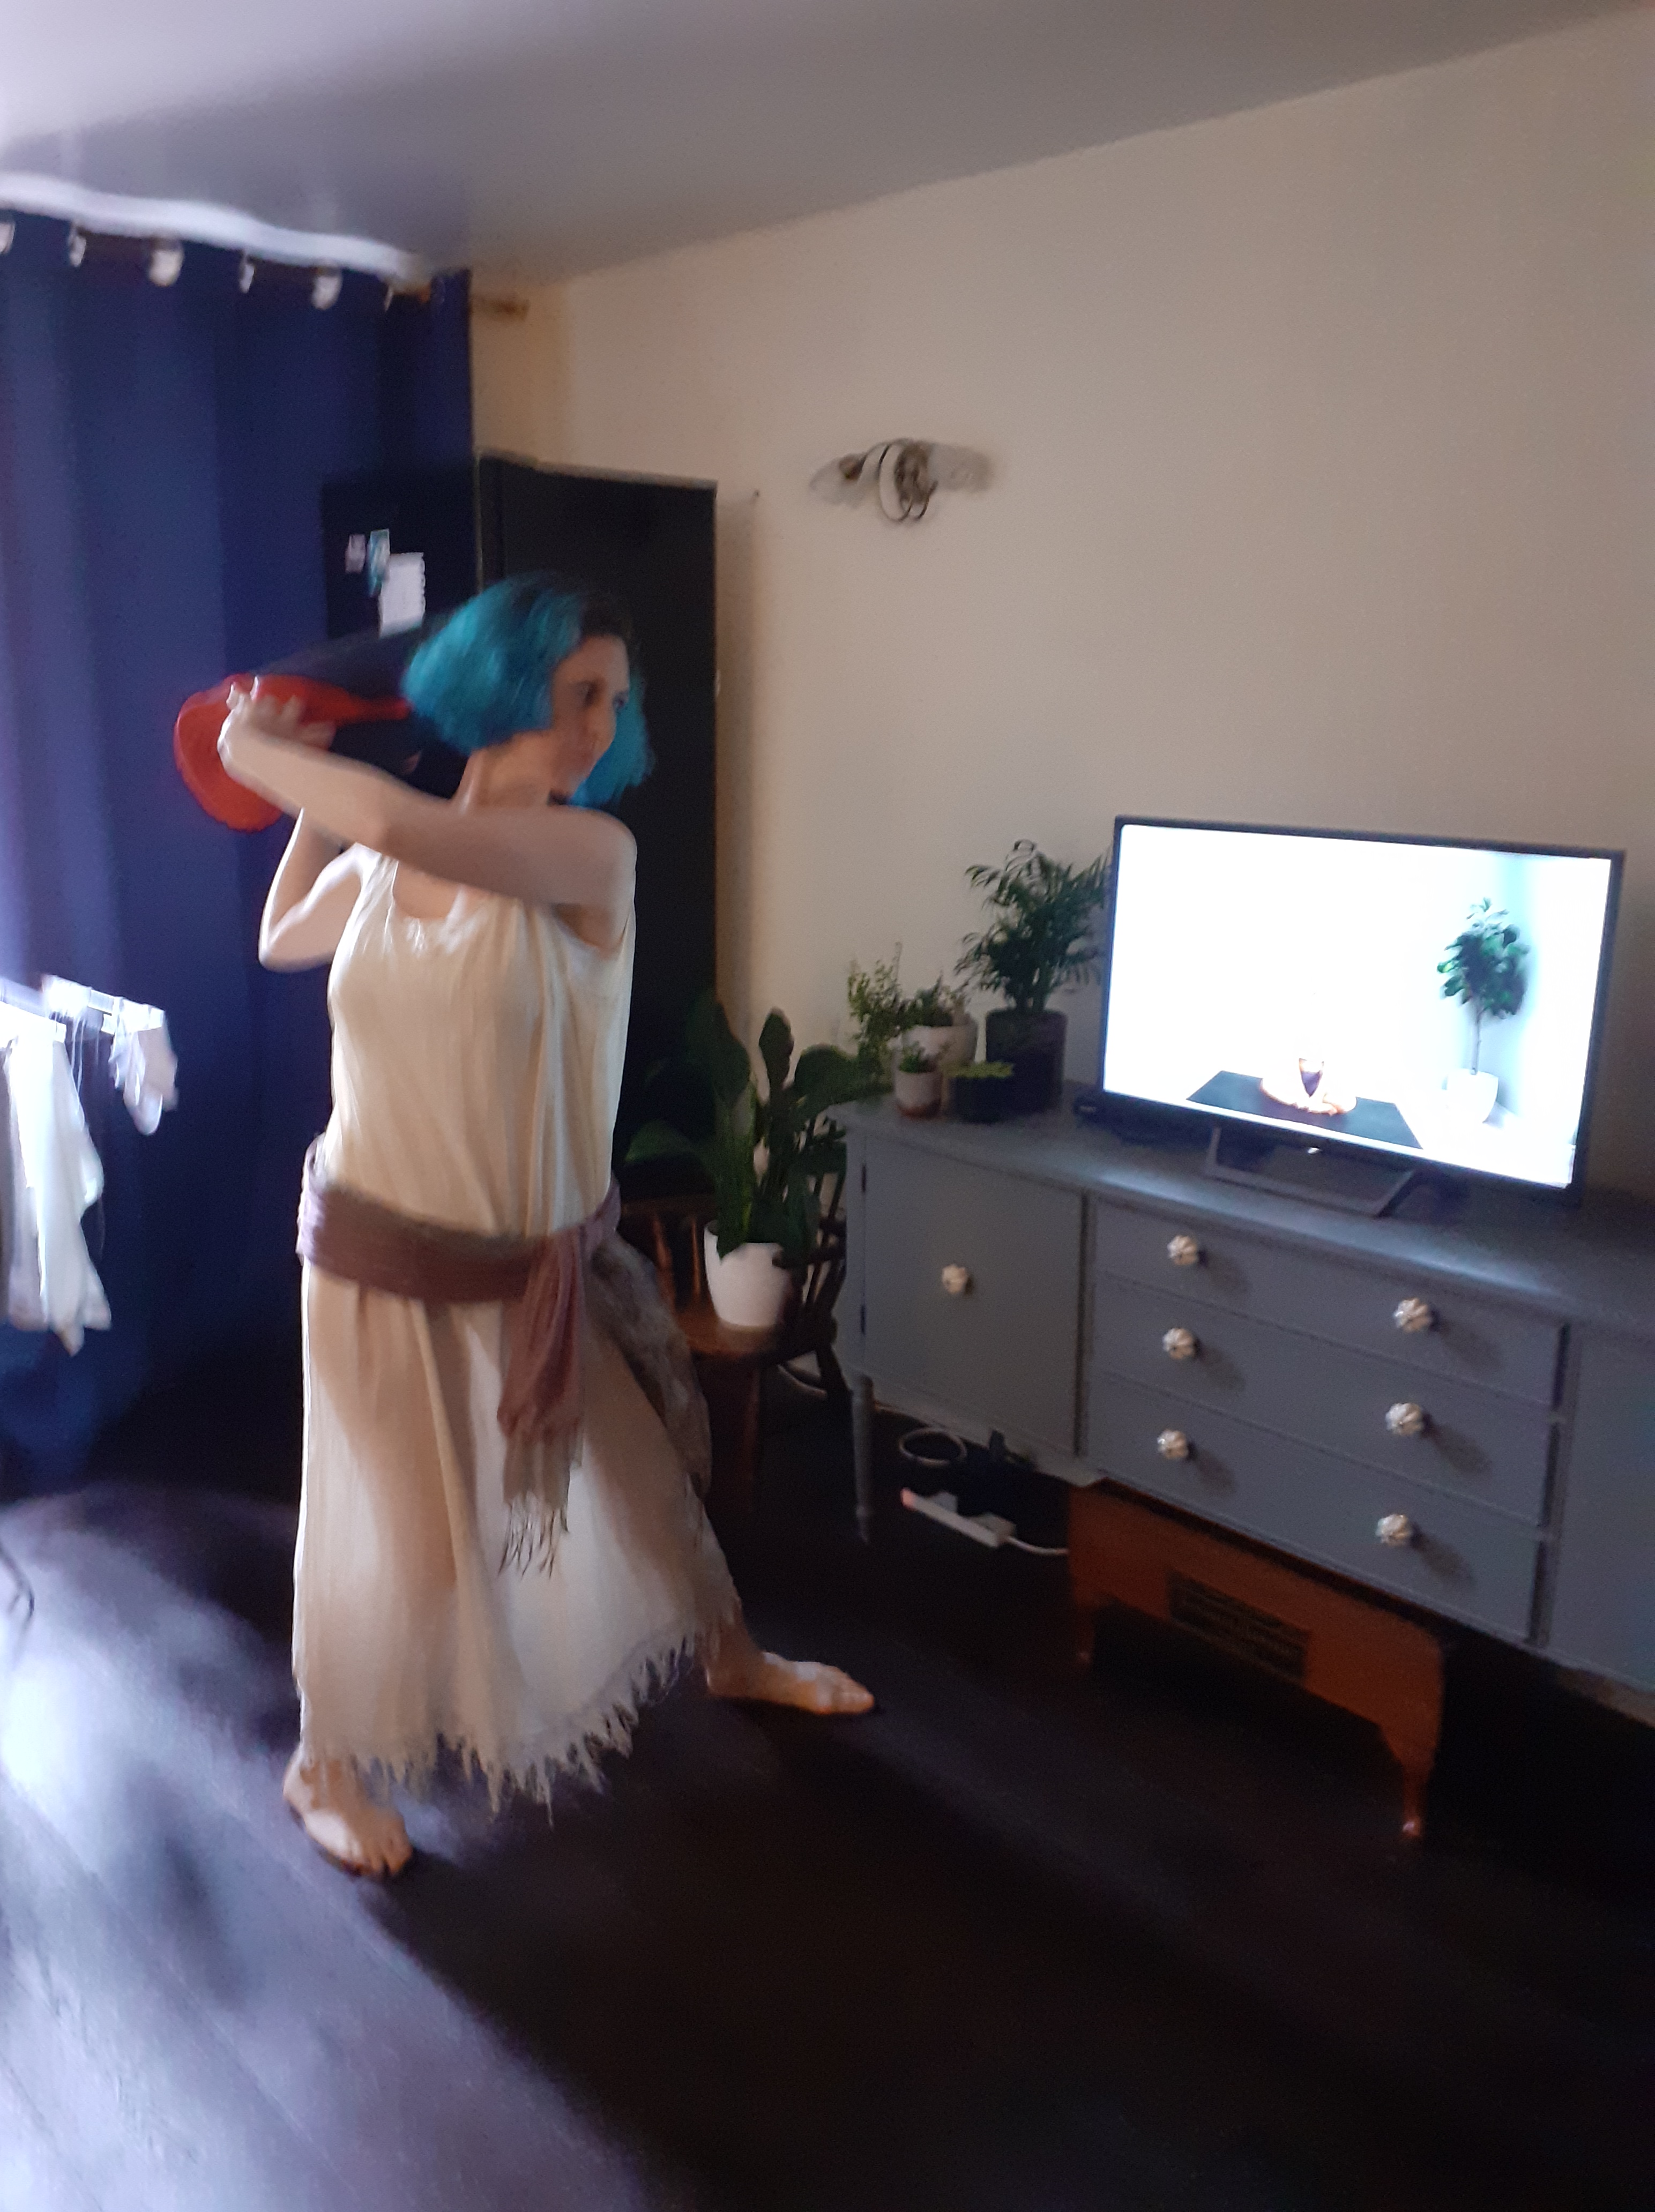 Georgi wearing a Grecian dress is standing in a sitting room. She is holding a yoga mat and poised to hit a television with the mat.